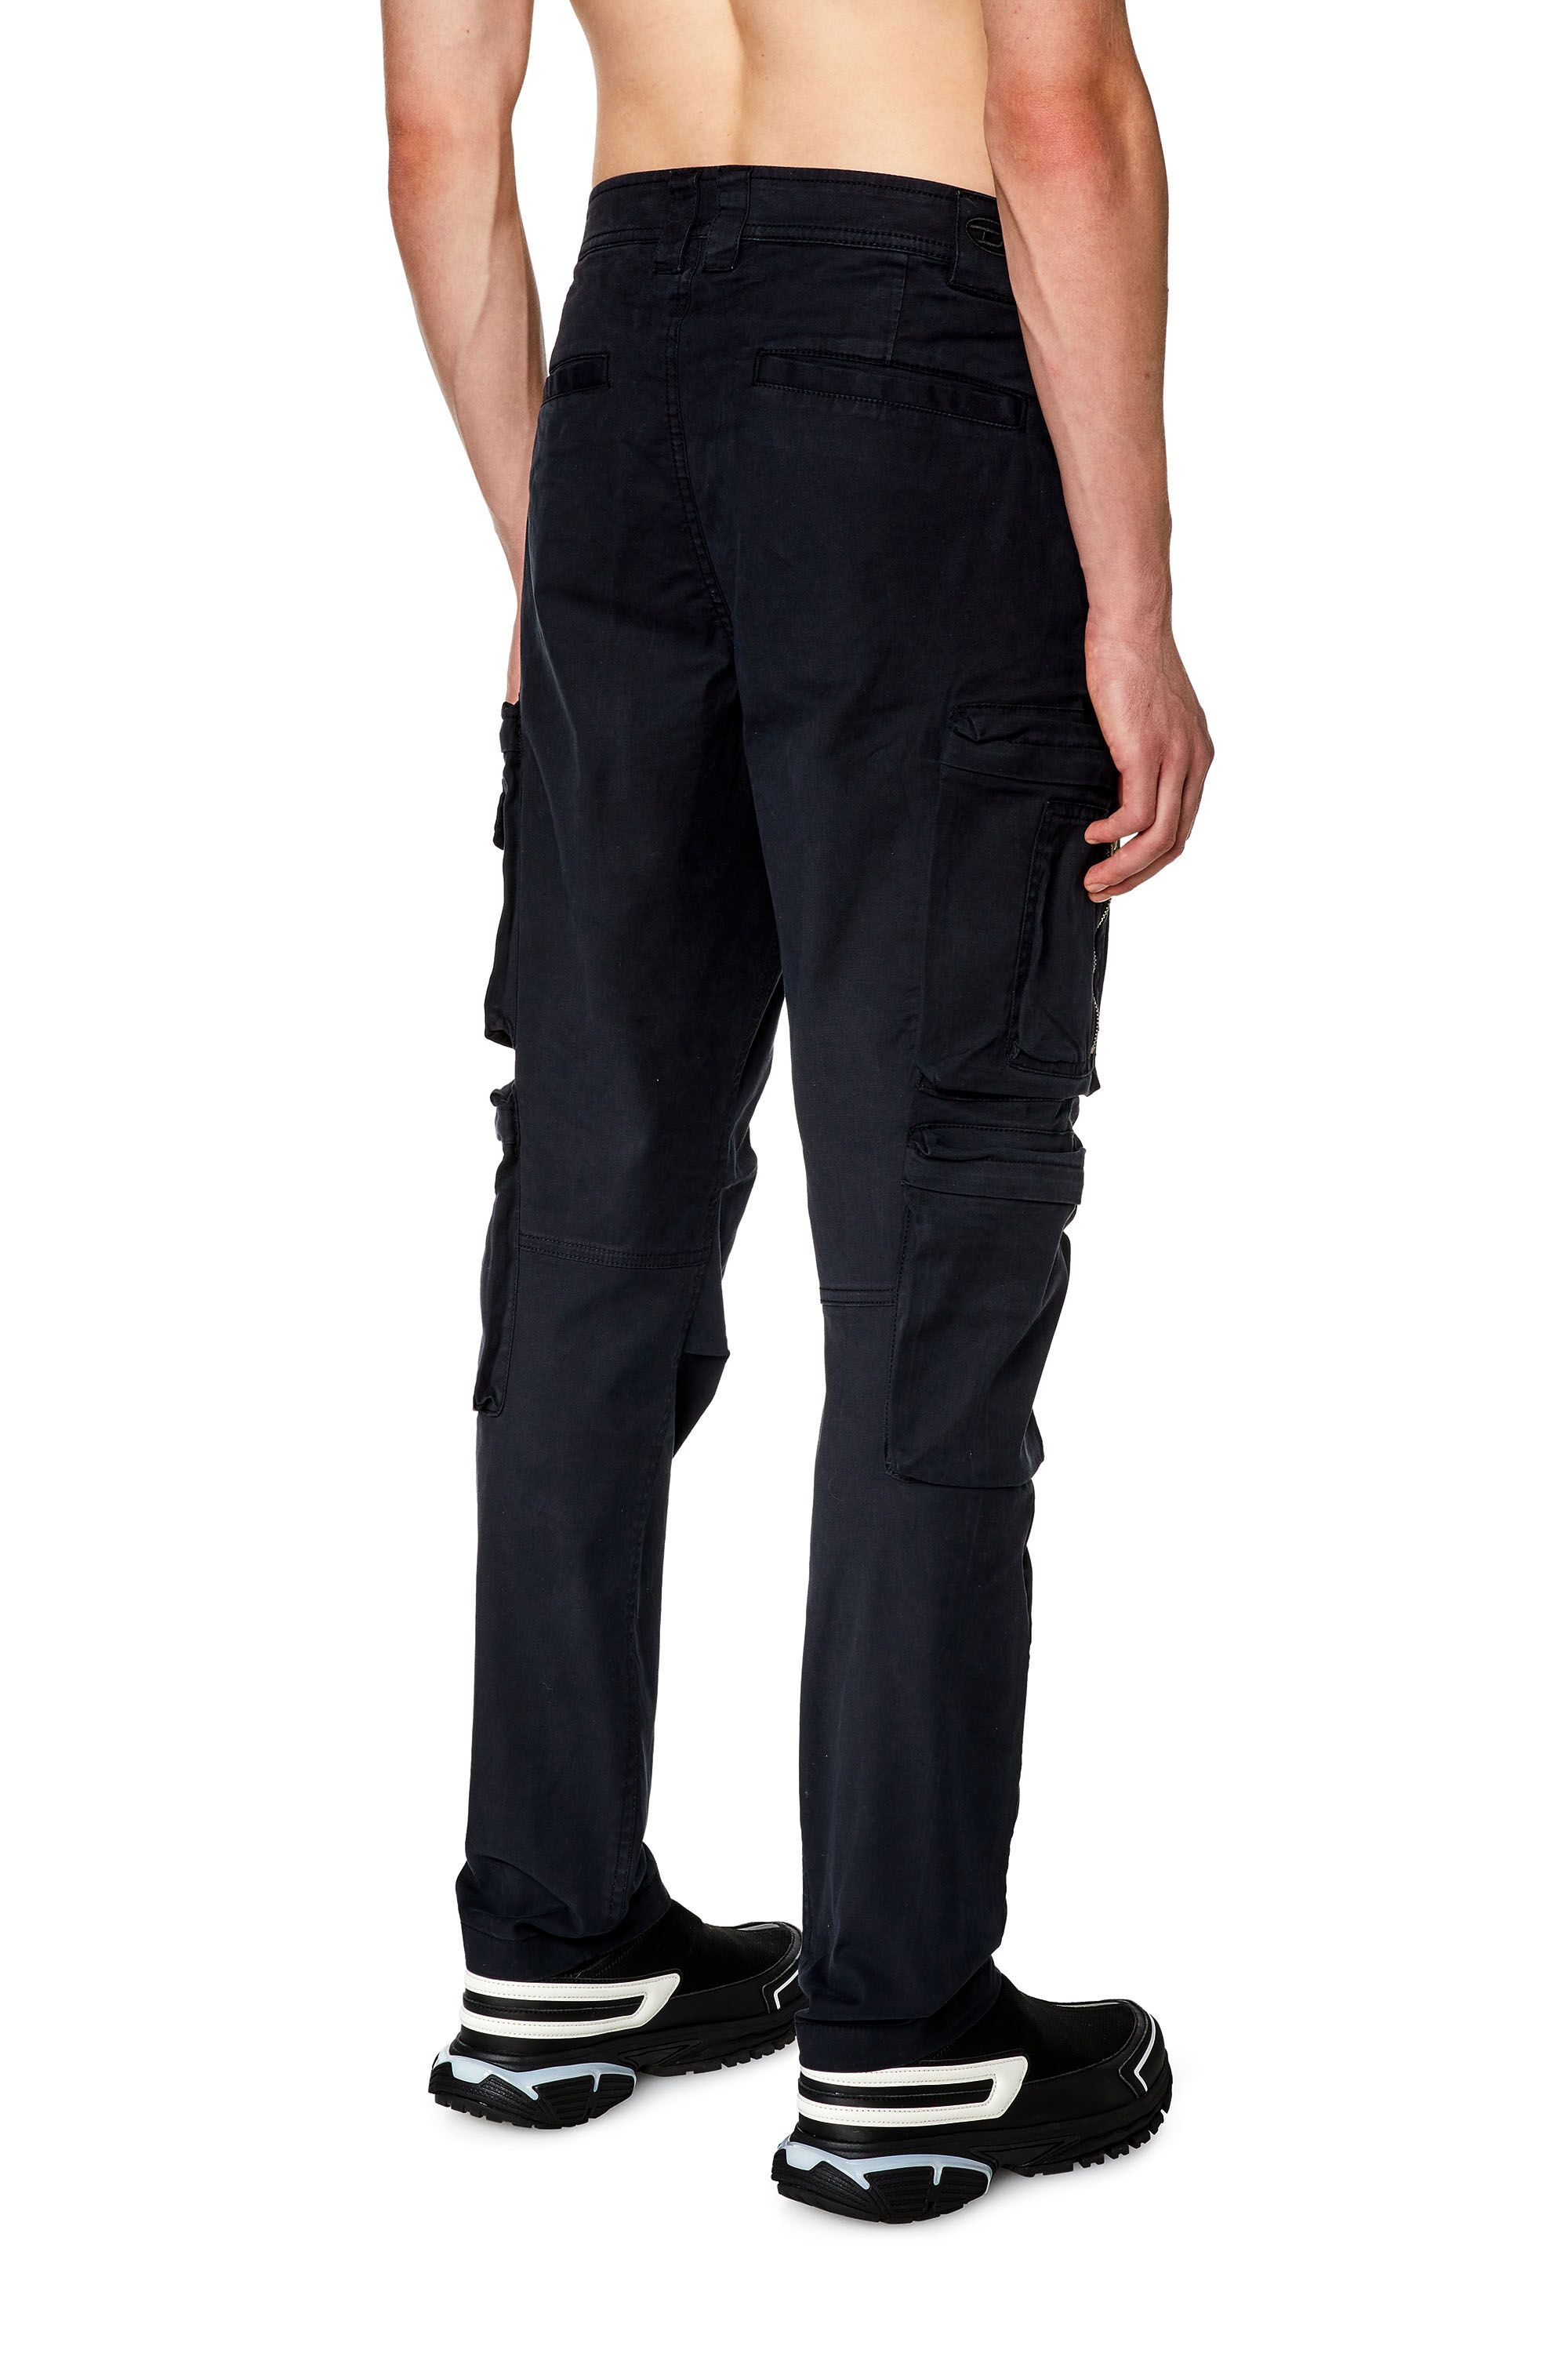 Men's Premium Rubber Jeans With Contrast Waistband, zip up fly